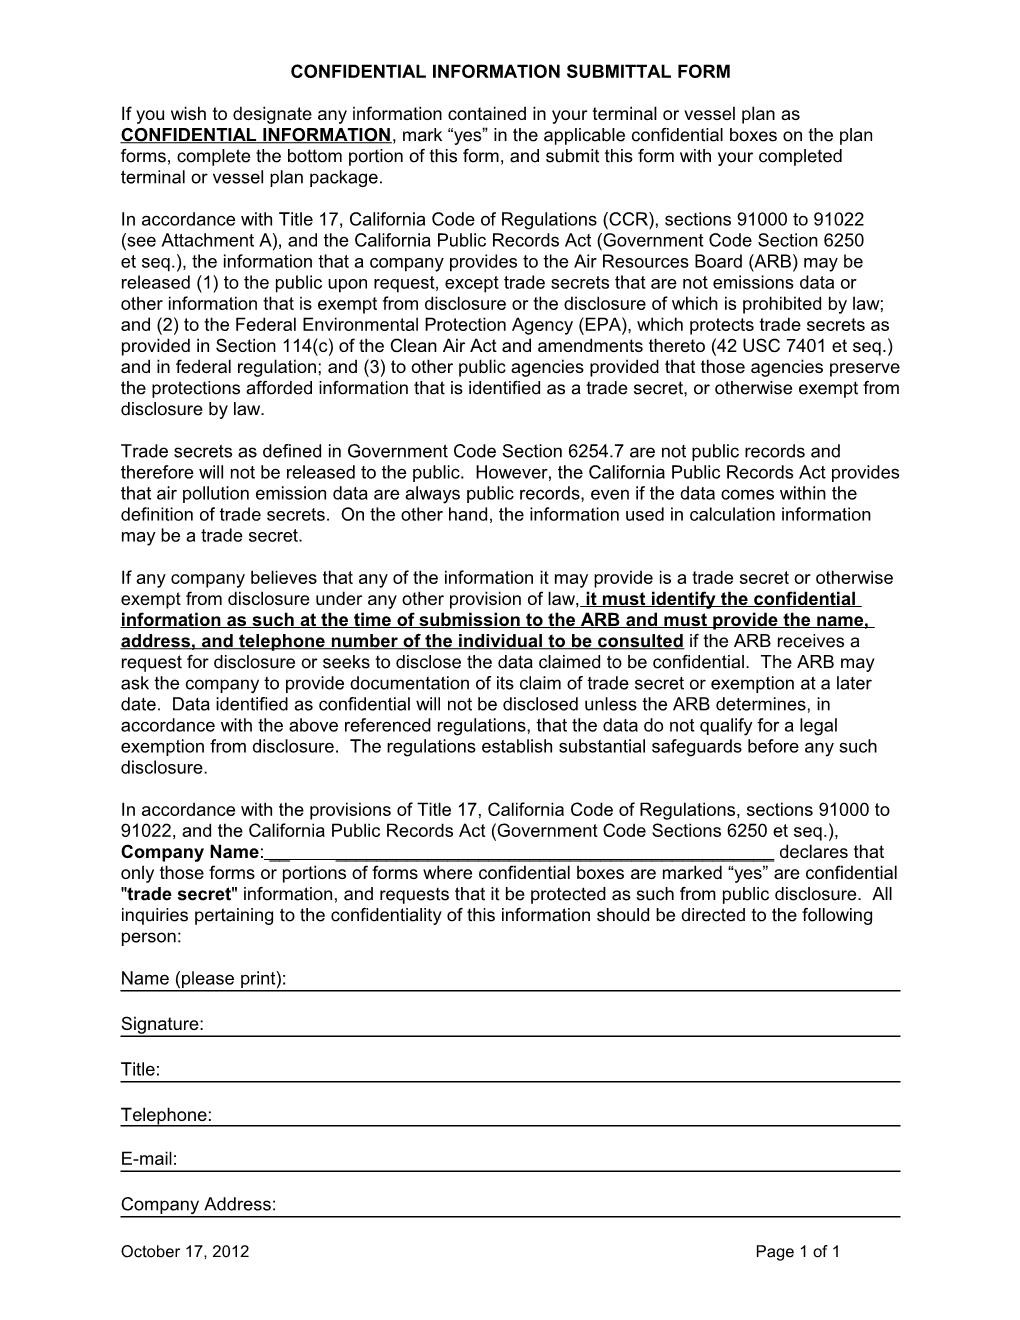 Confidential Information Submittal Form